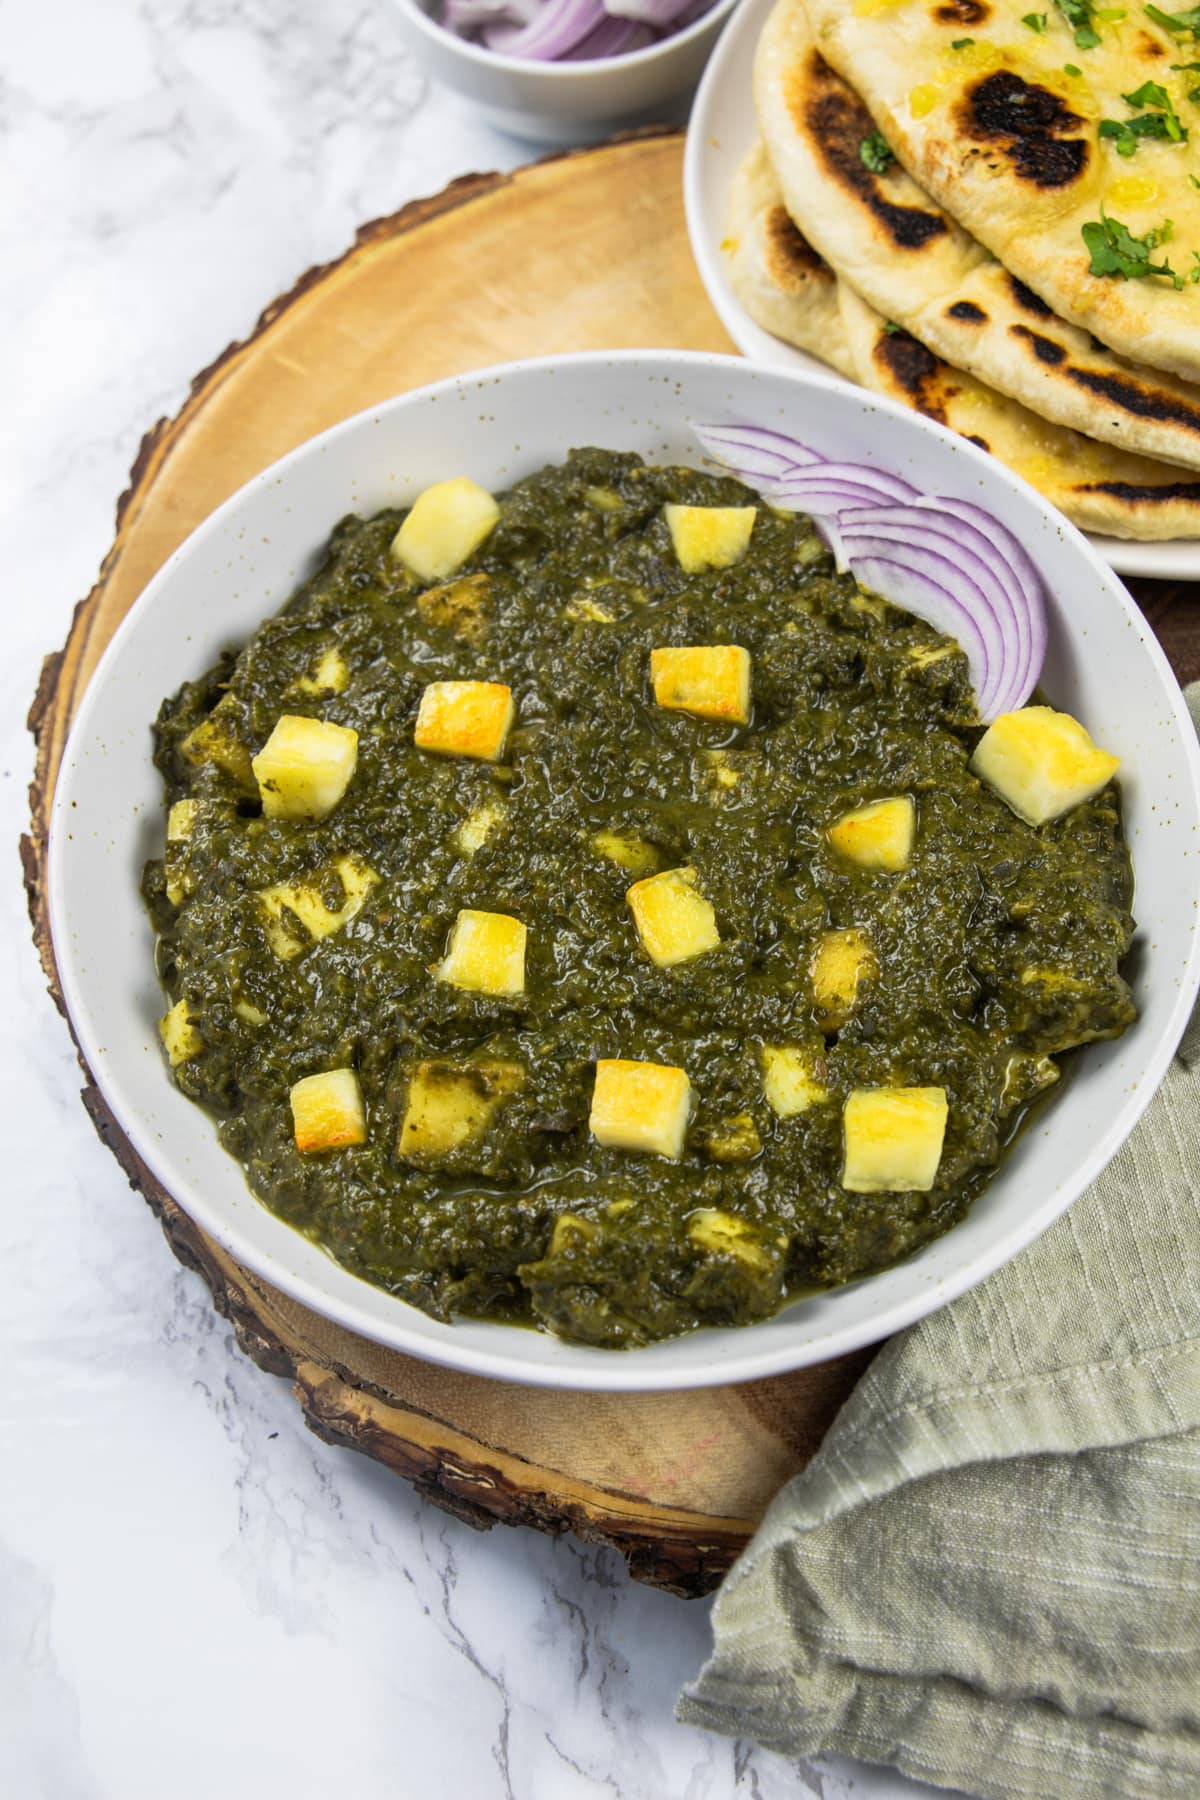 saag paneer served with sliced onions and naan.